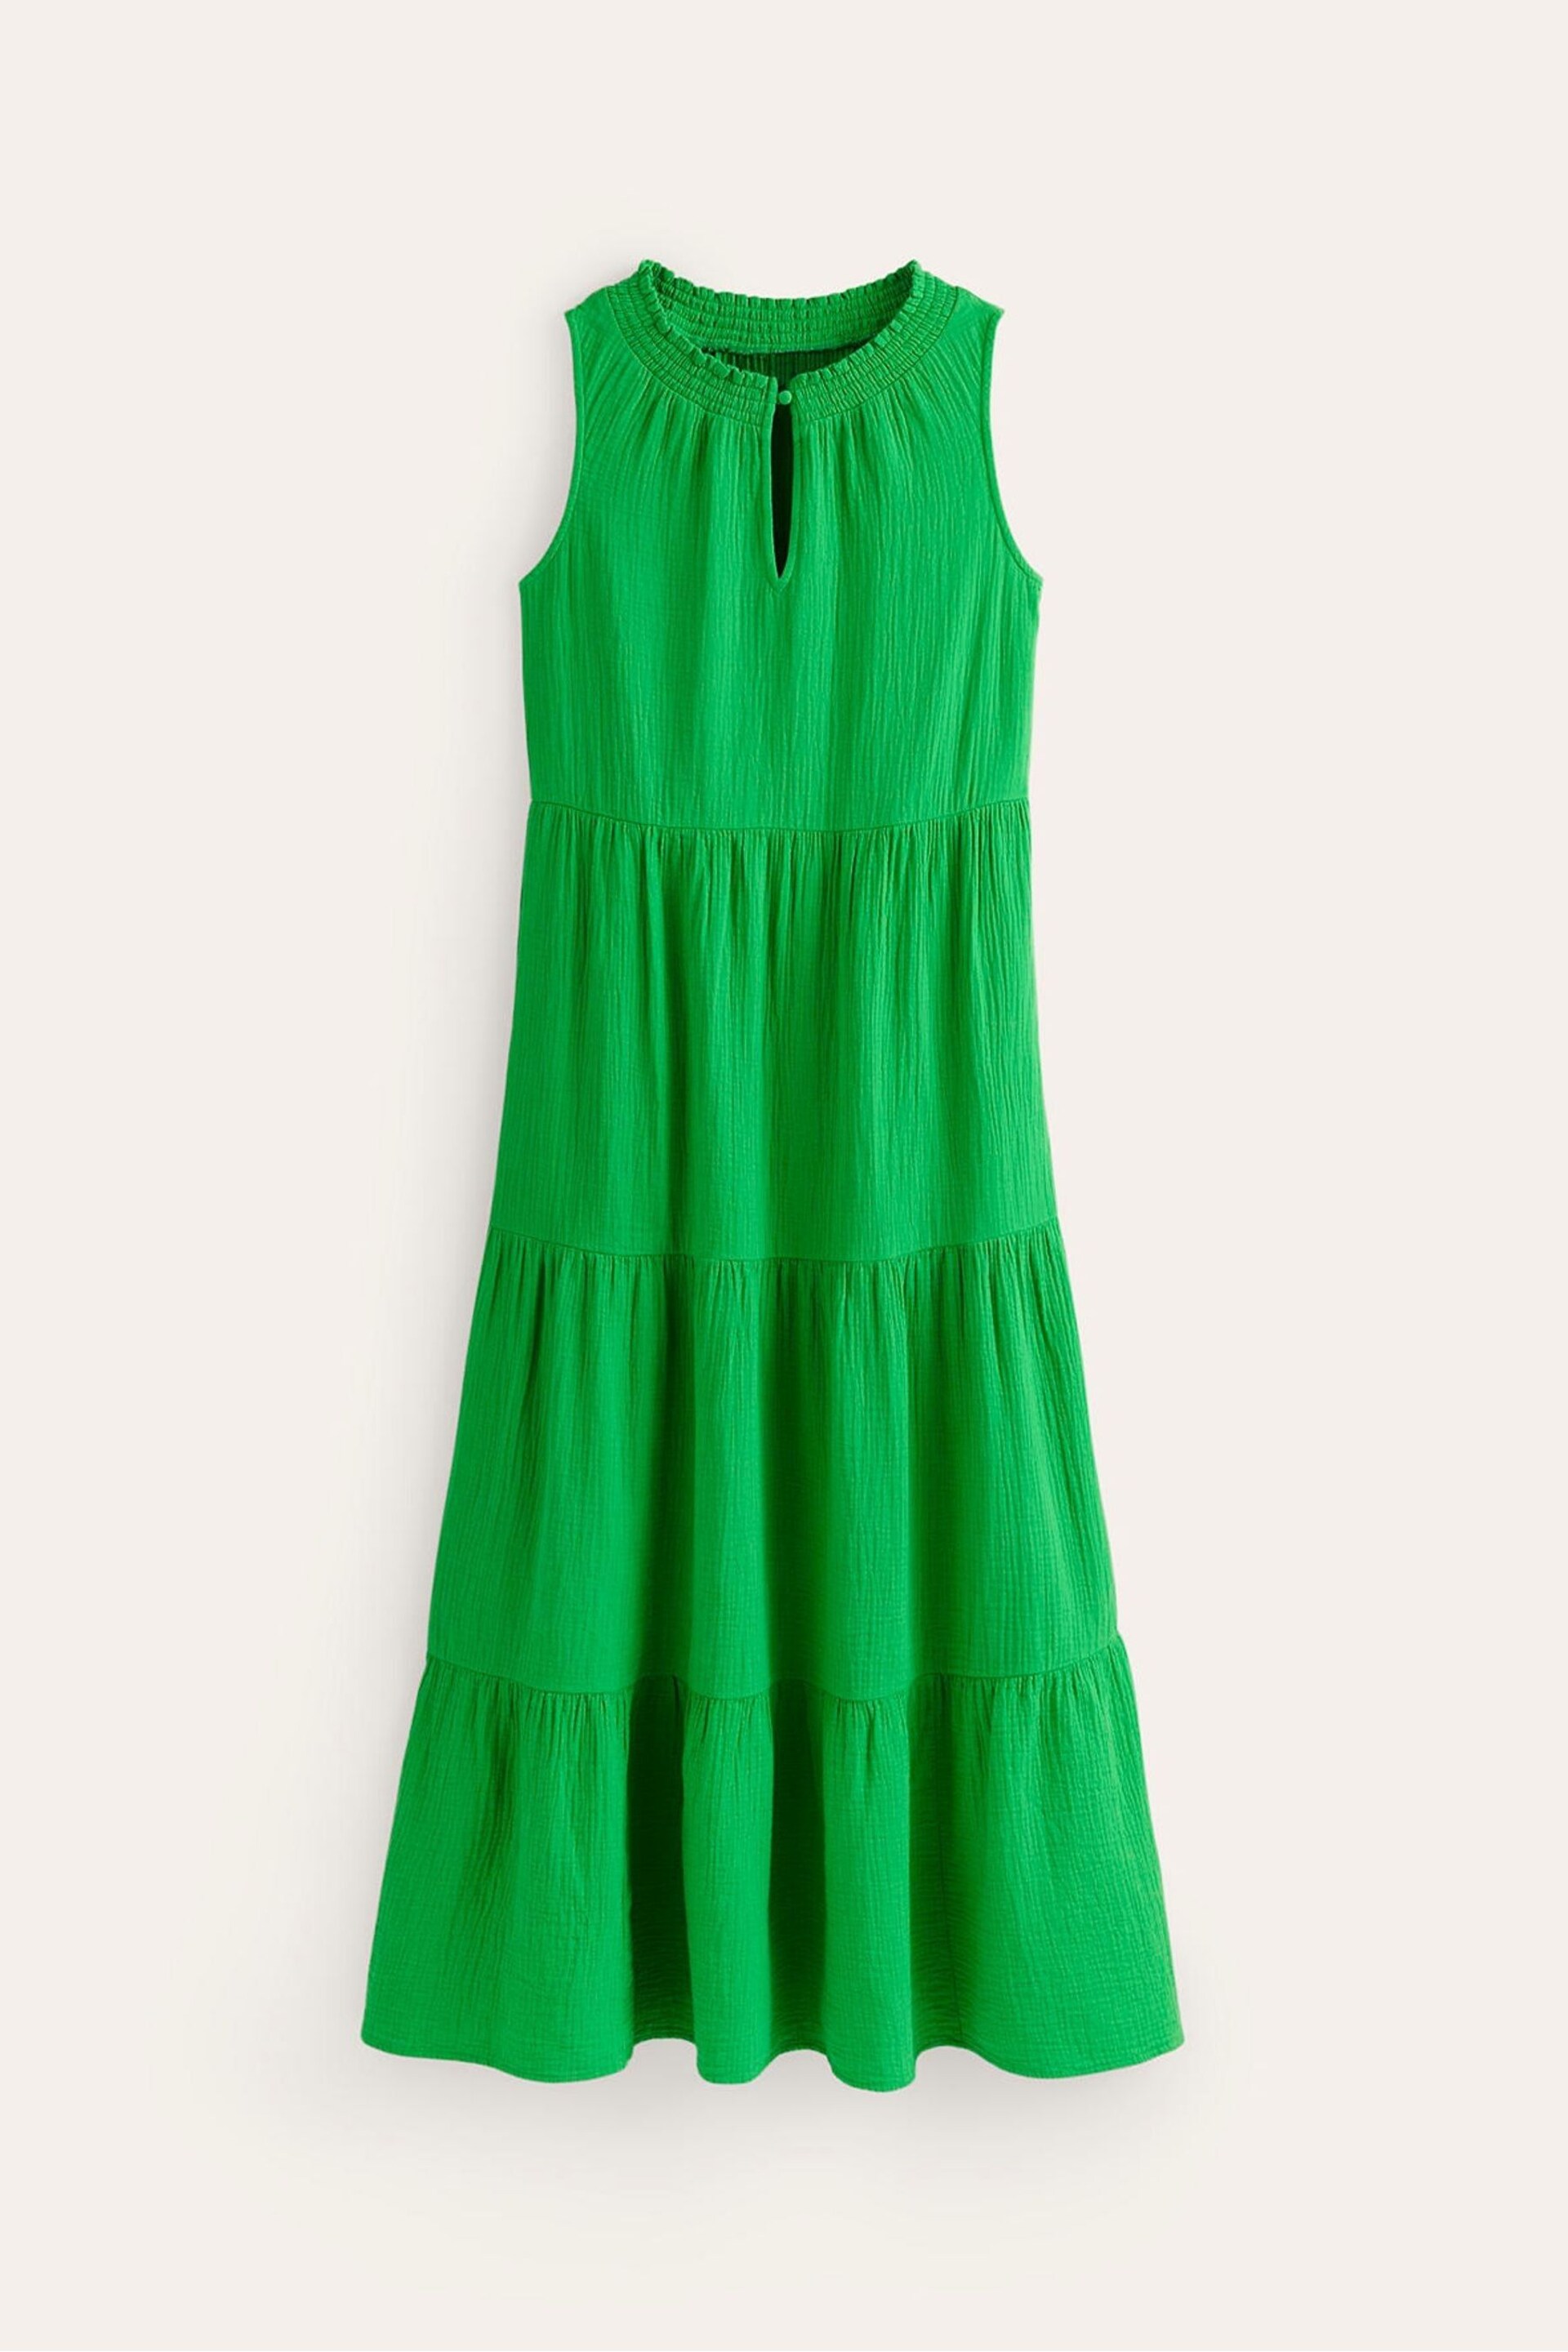 Boden Green Double Cloth Maxi Tiered Dress - Image 5 of 5